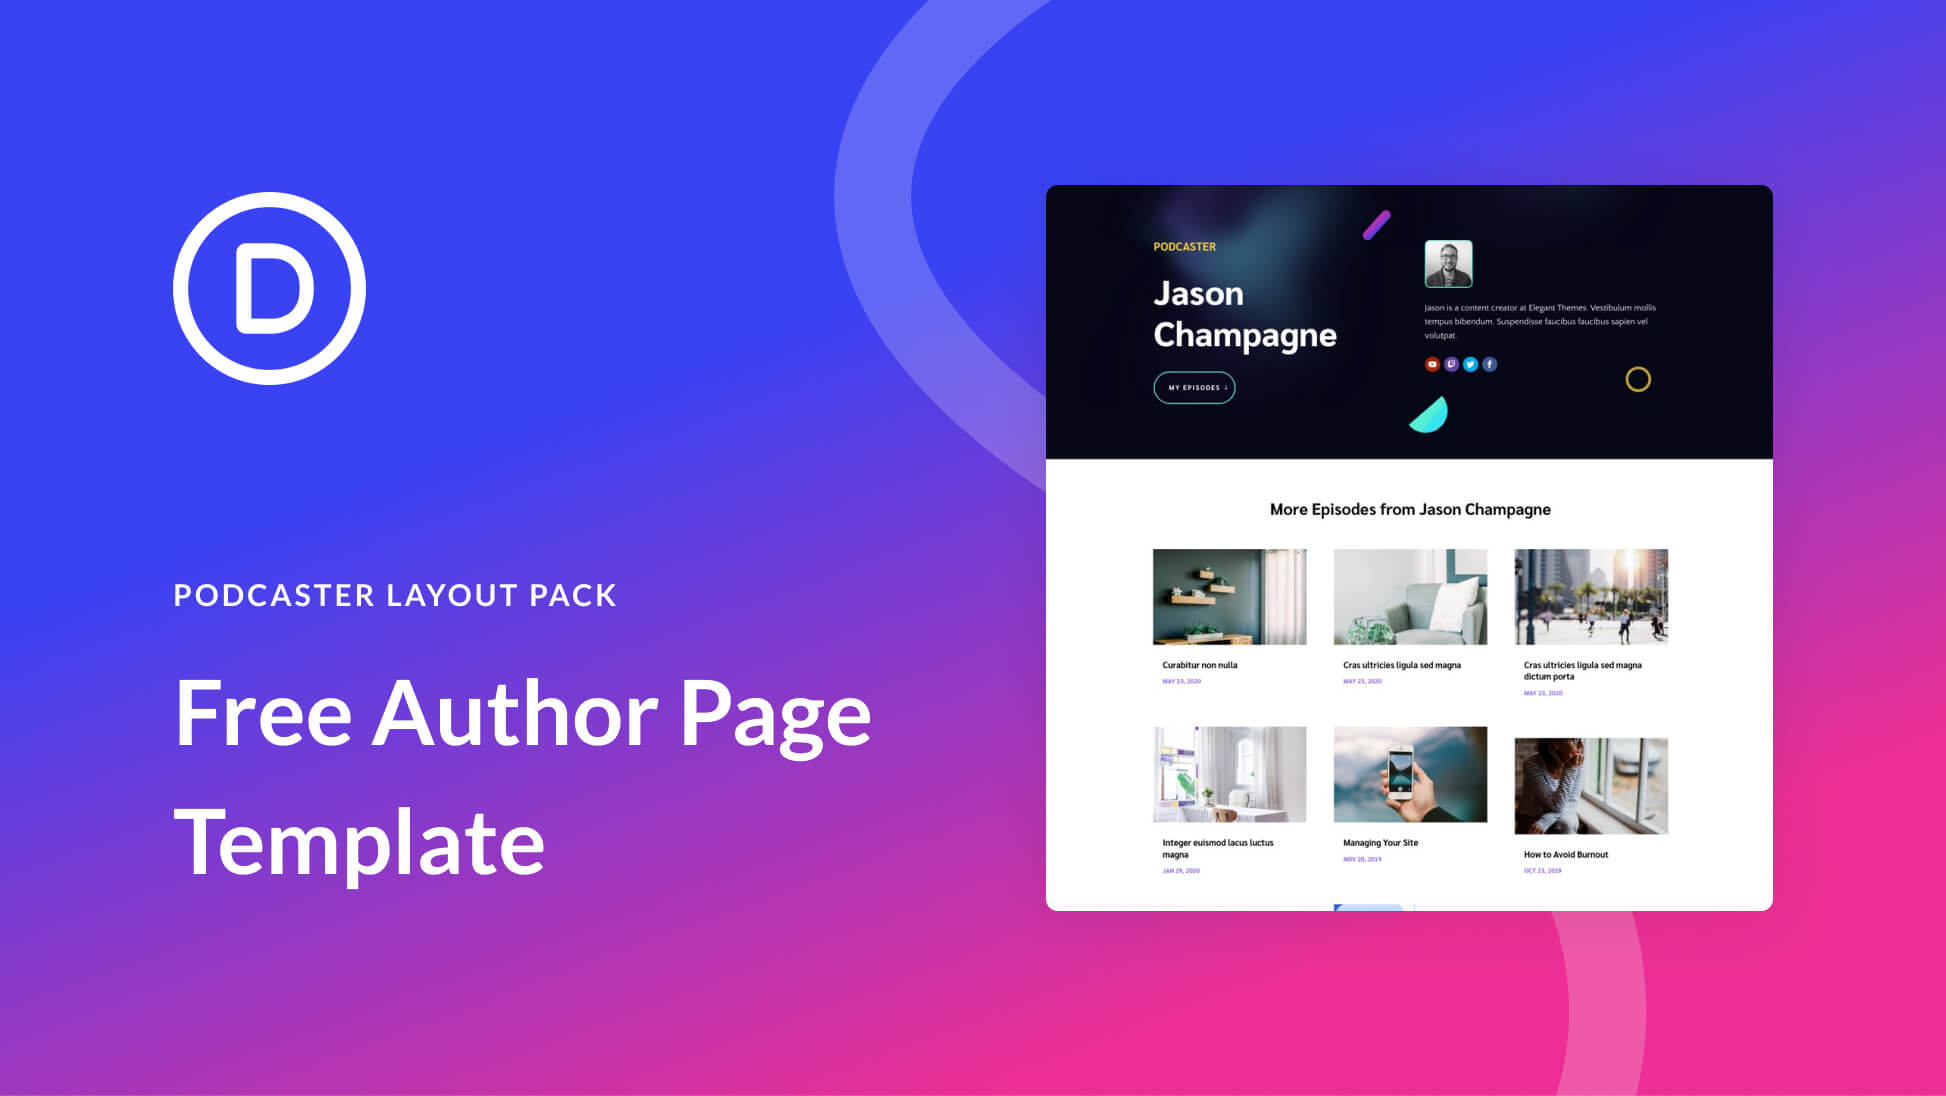 Download a FREE Author Page Template for Divi’s Podcaster Layout Pack